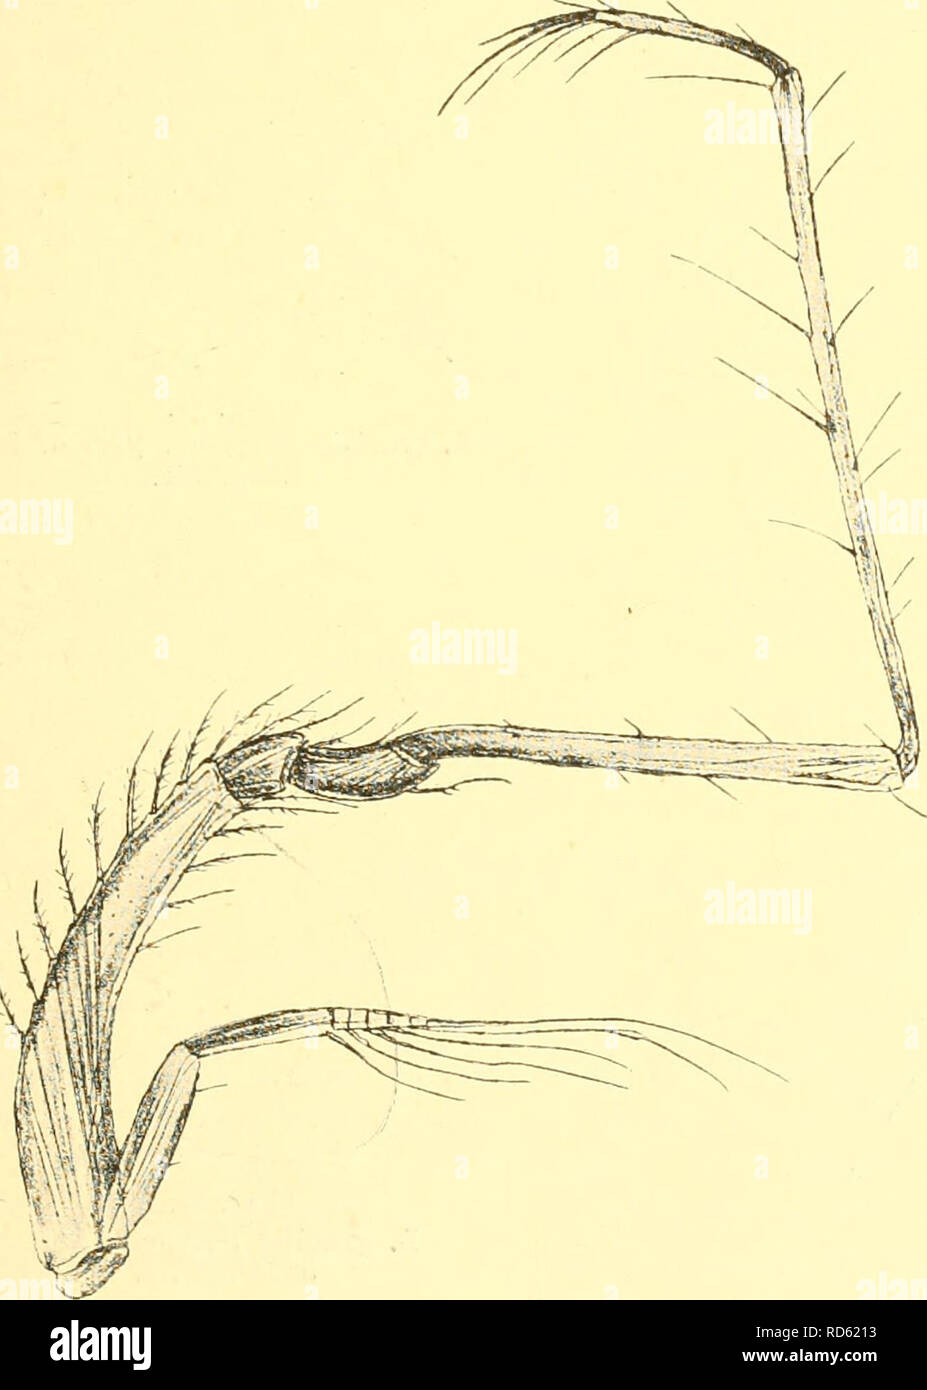 . Cumacea (Sympoda). Cumacea. Cumacea: 11. Diastylidae, 7. Leptostylis 127 9. L. productus Norm. 1879 L. produda. A. M. Norman in: Ann. nat. Hist., ser. 5 V.3 p. 65 | 1912 L. productus, T. Stebbing in: Ann. S. Afr. Mus., v.0 p. 153. Pseudorostral lobes short, blunt, slightly upturned. Carapace short, as broad as long, nearly smooth, antero-lateral margin strongly serrate. Telson not longer than 6*'^ pleon segment, nor more than half the 5^'', without lateral spines, apical pair rather large. Peduncle of uropods nearly thrice as long as the telson, with 4 spaced spines on the medial margin: e Stock Photo